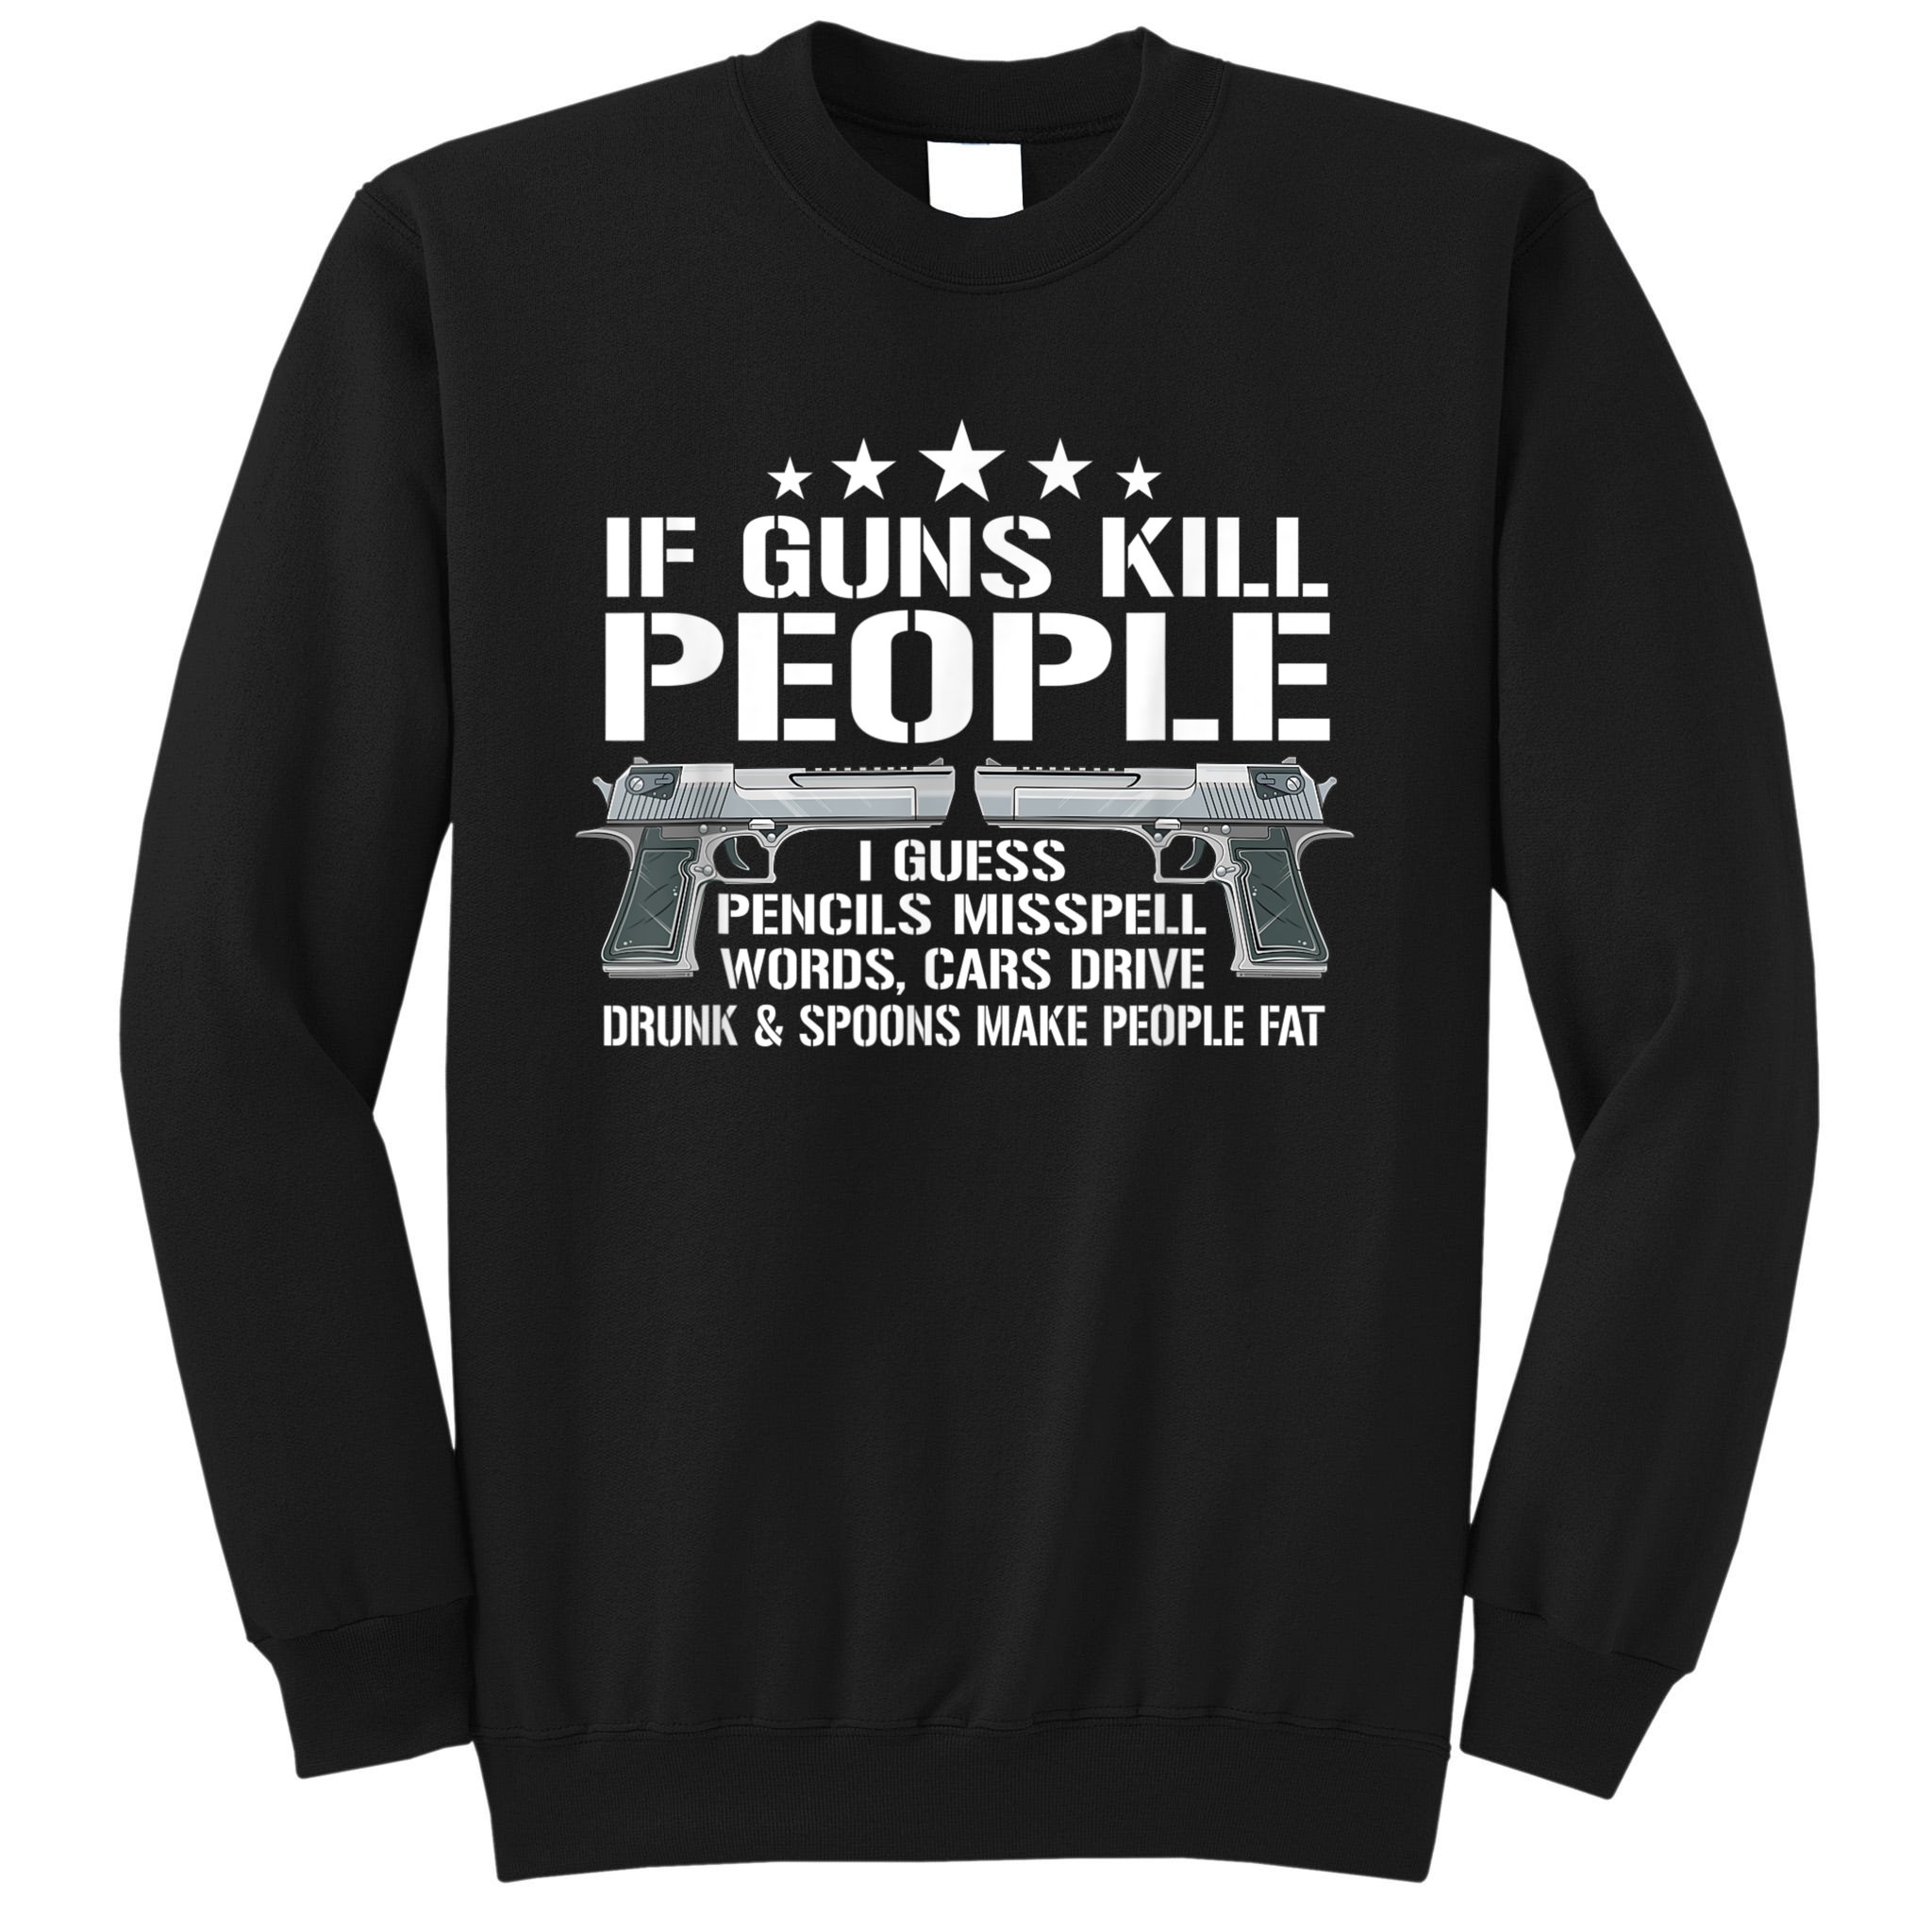 Security Provided By AR-15 Second 2nd Amendment Pro-Gun Rights Hoodie Pullover 